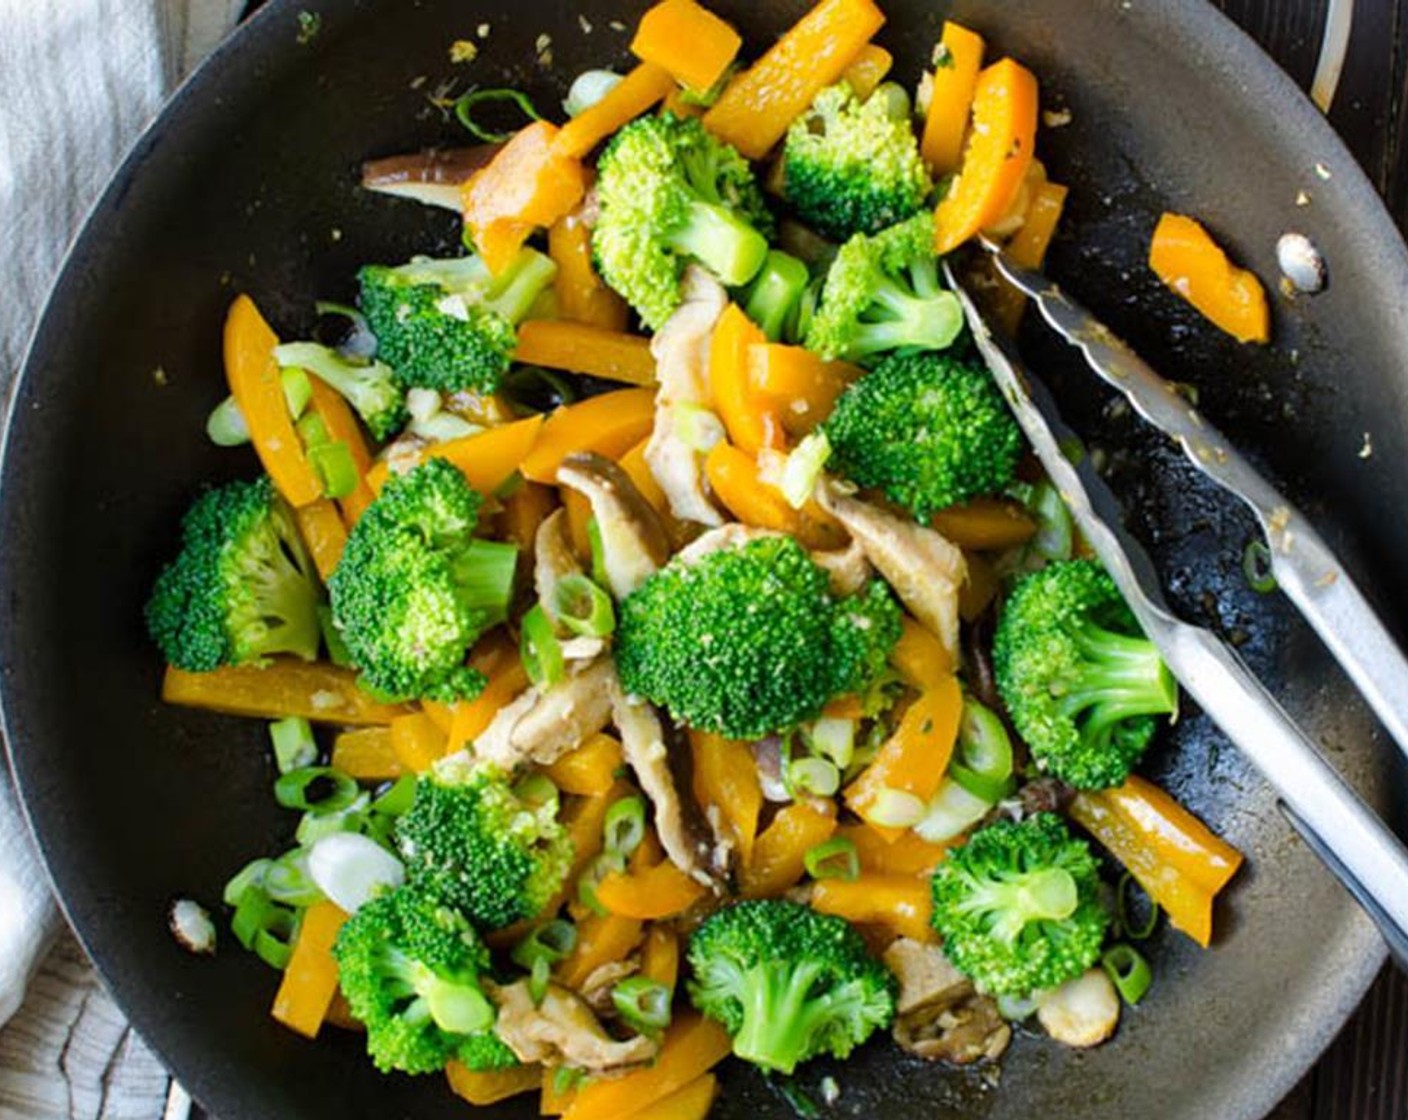 step 7 In a large skillet (with a lid) over medium high heat, add Sesame Oil (1 Tbsp). When pan is hot, add the Red Bell Peppers (2), Shiitake Mushrooms (2 1/3 cups), Broccoli Florets (3 cups) and cook for 1-2 minutes, shaking the pan occasionally.